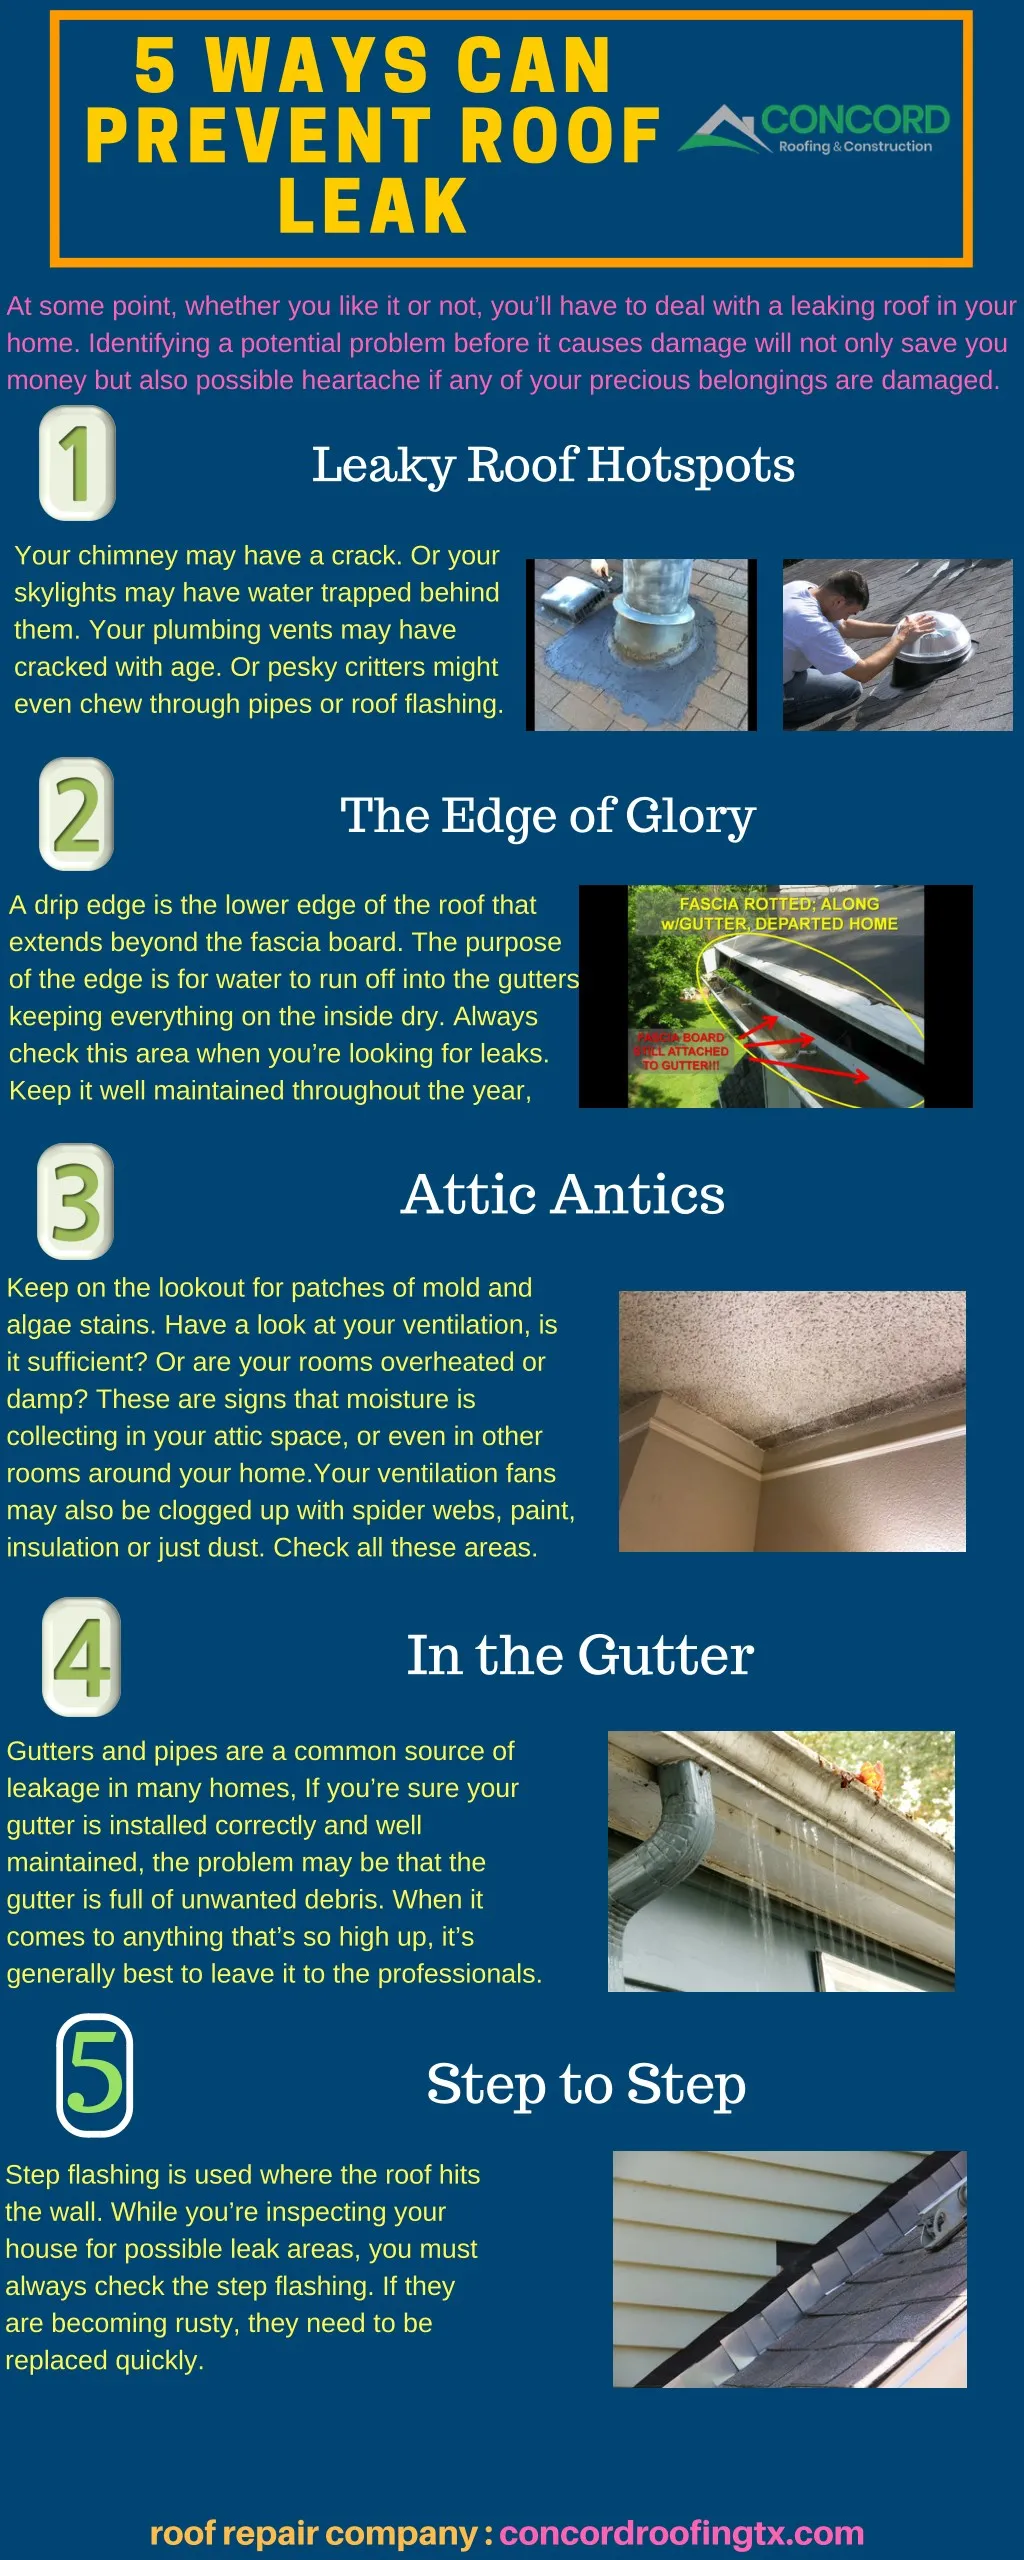 5 ways can prevent roof leak